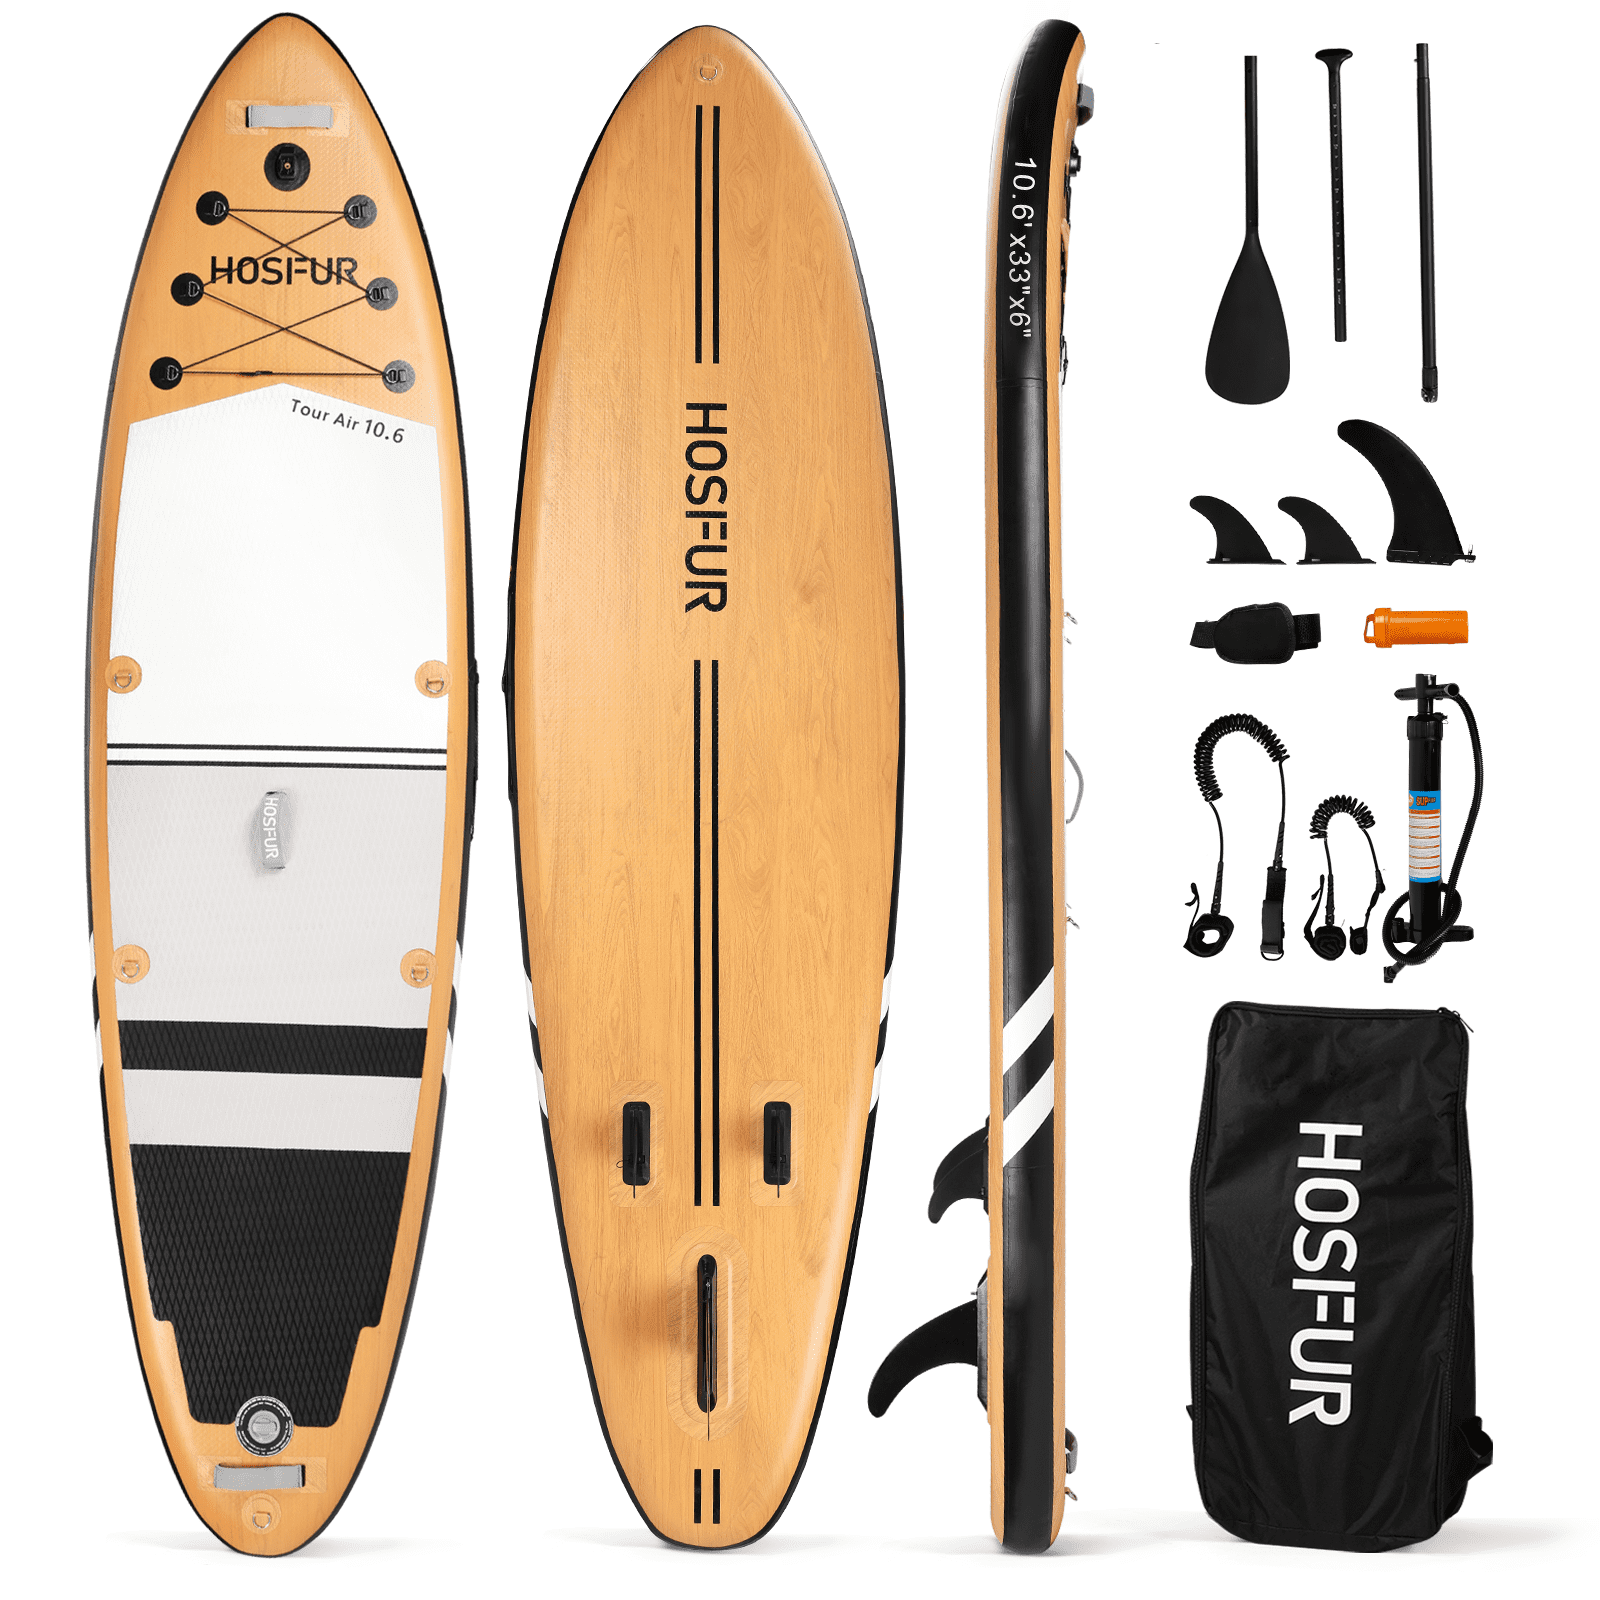 10FT Inflatable Stand Up Paddle Board SUP Surfboard Adjustable Non-Slip Deck NEW 